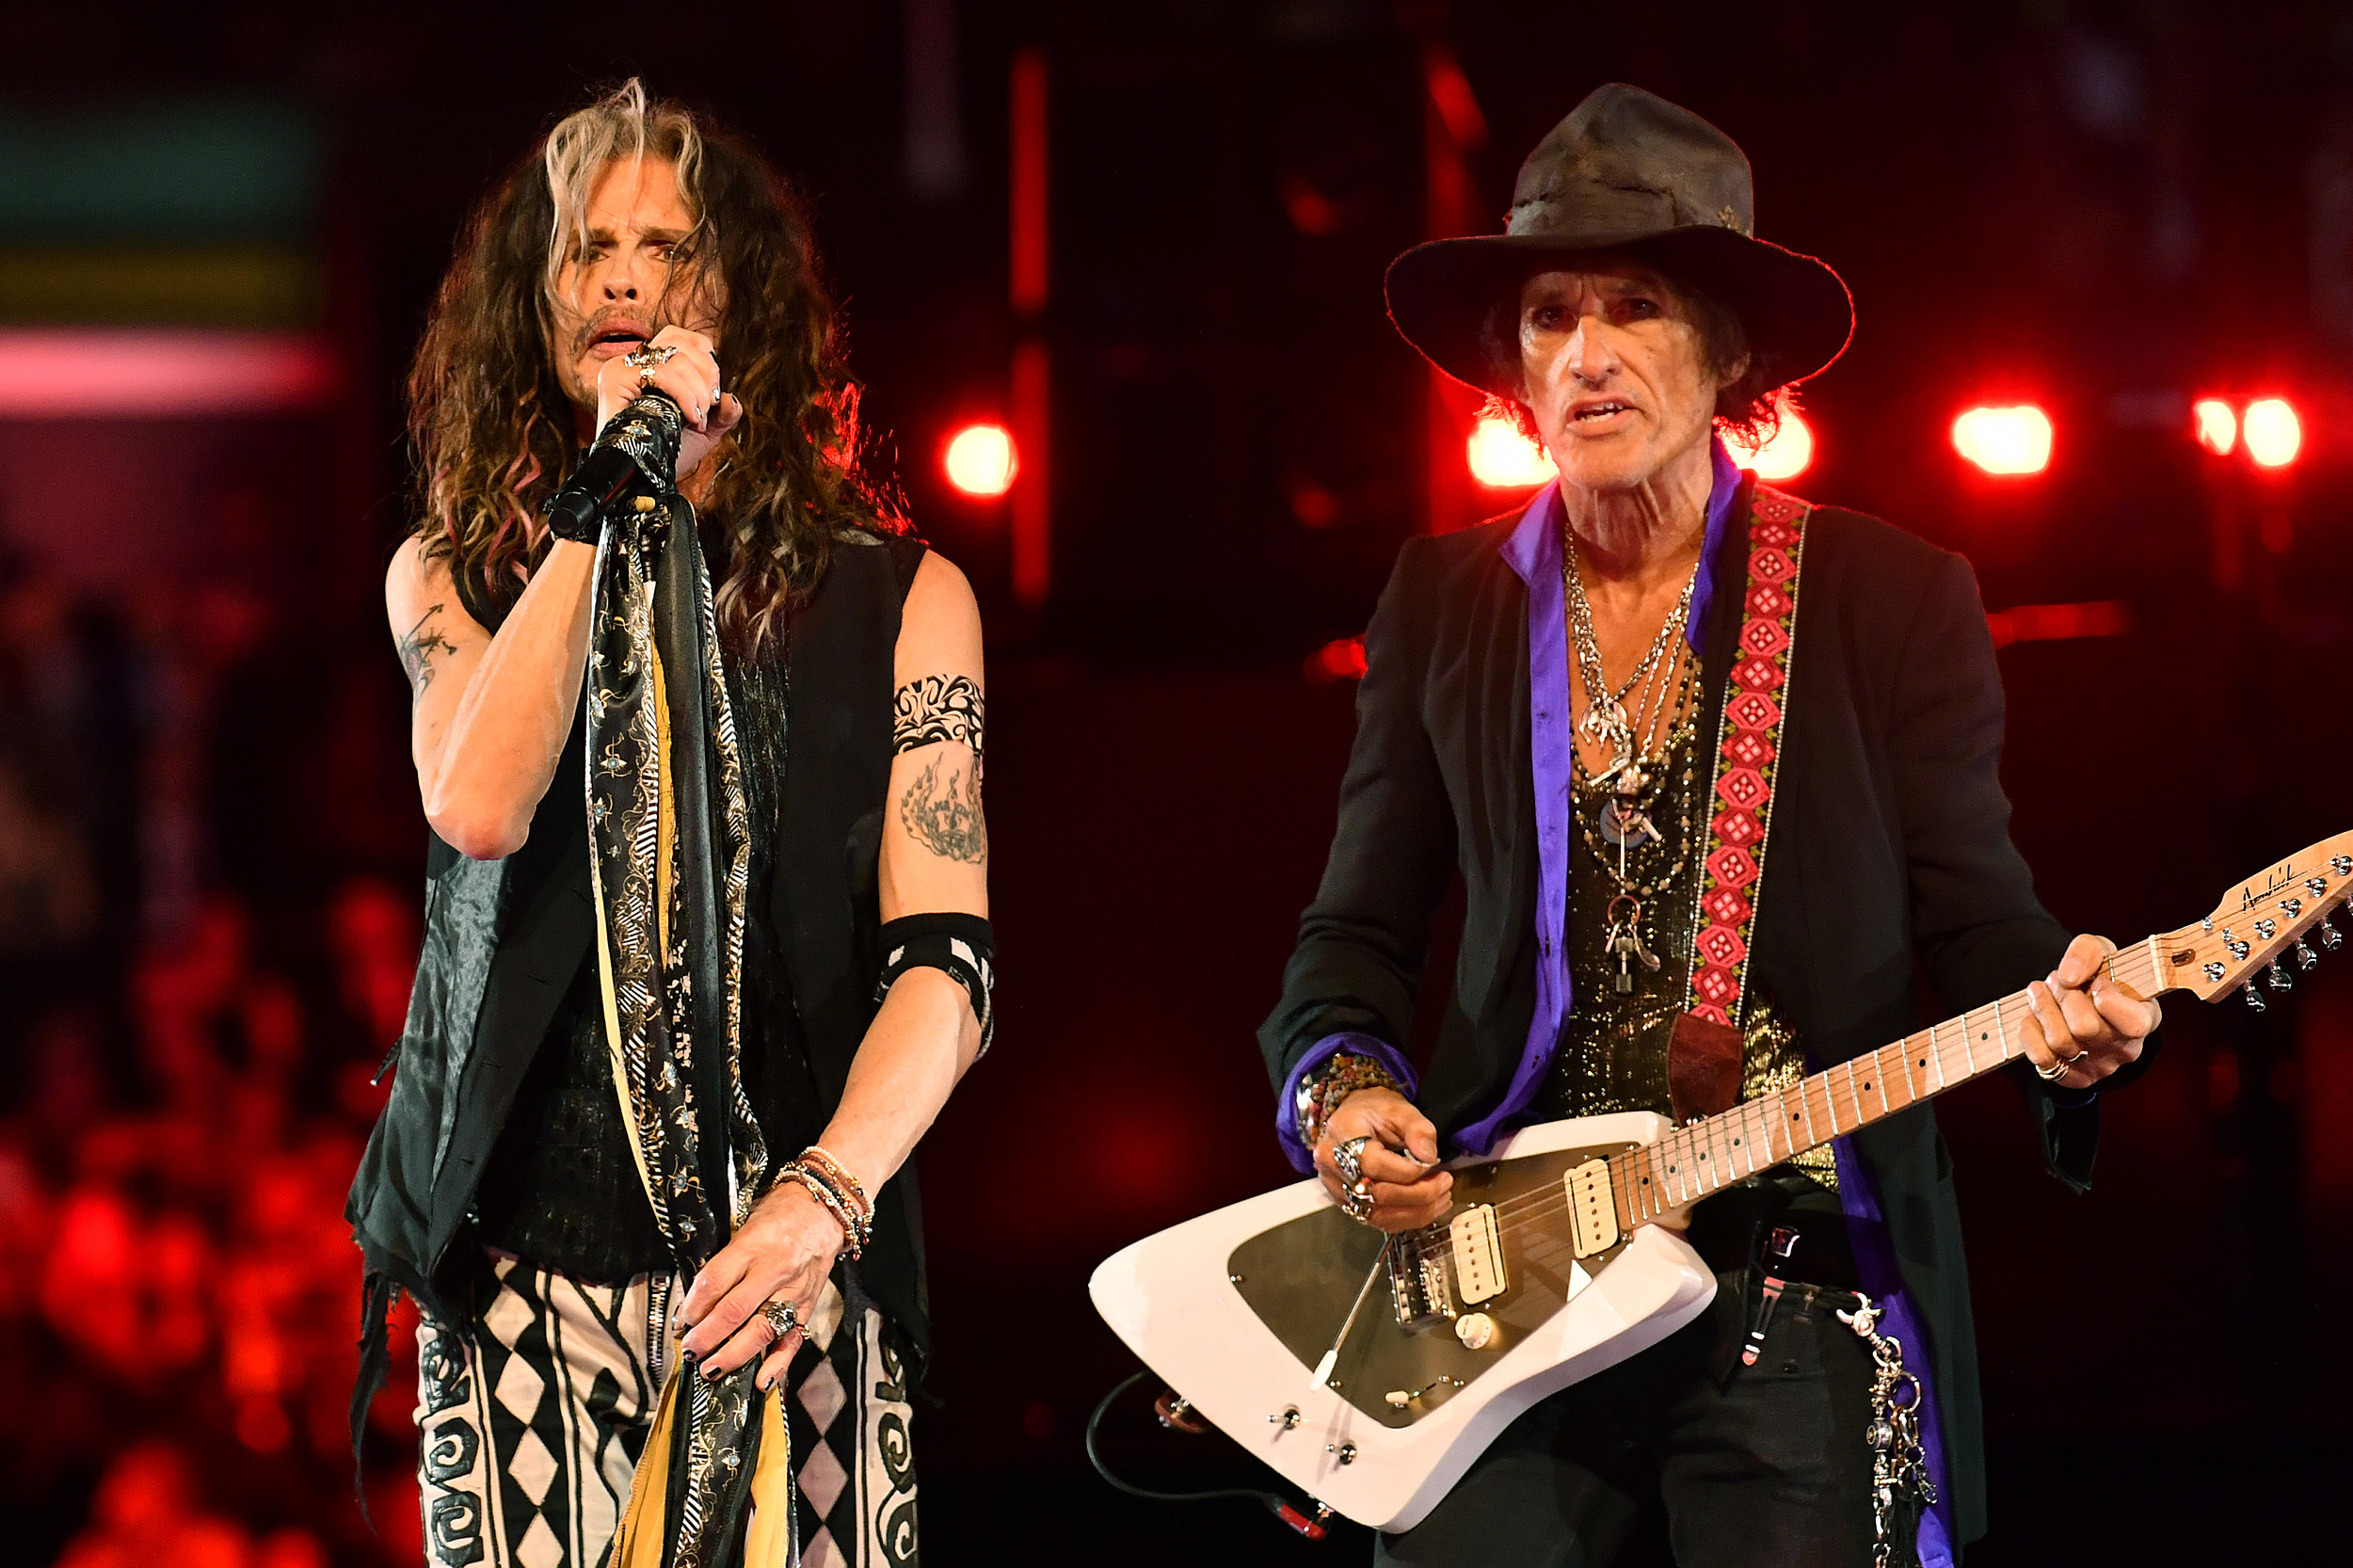 Aerosmith to celebrate 50th anniversary with concert at Boston's Fenway  Park in September